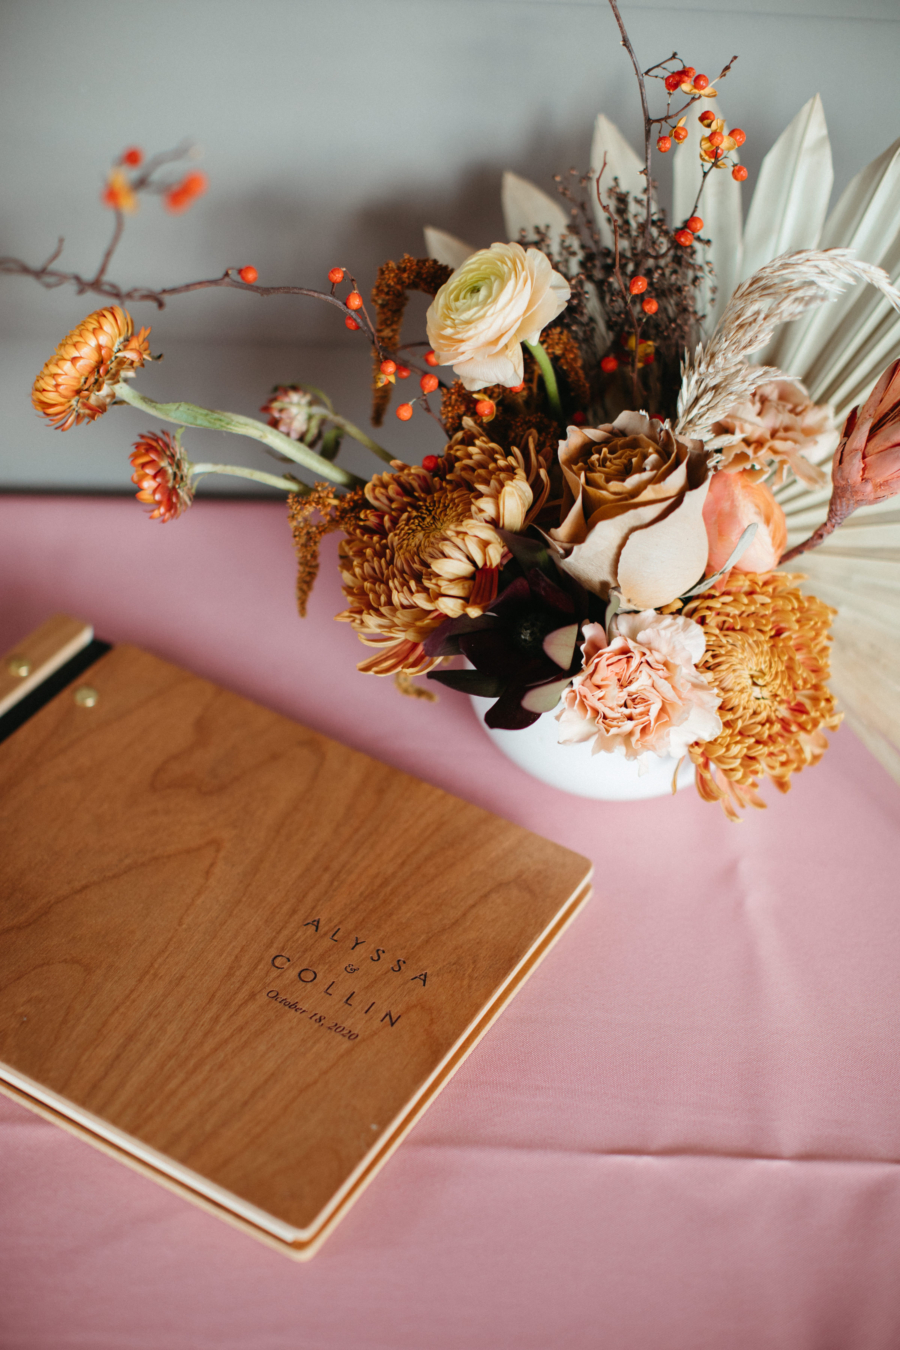 Intimate Boho Autumn Wedding at The Cordelle | Hannah Leigh Imagery